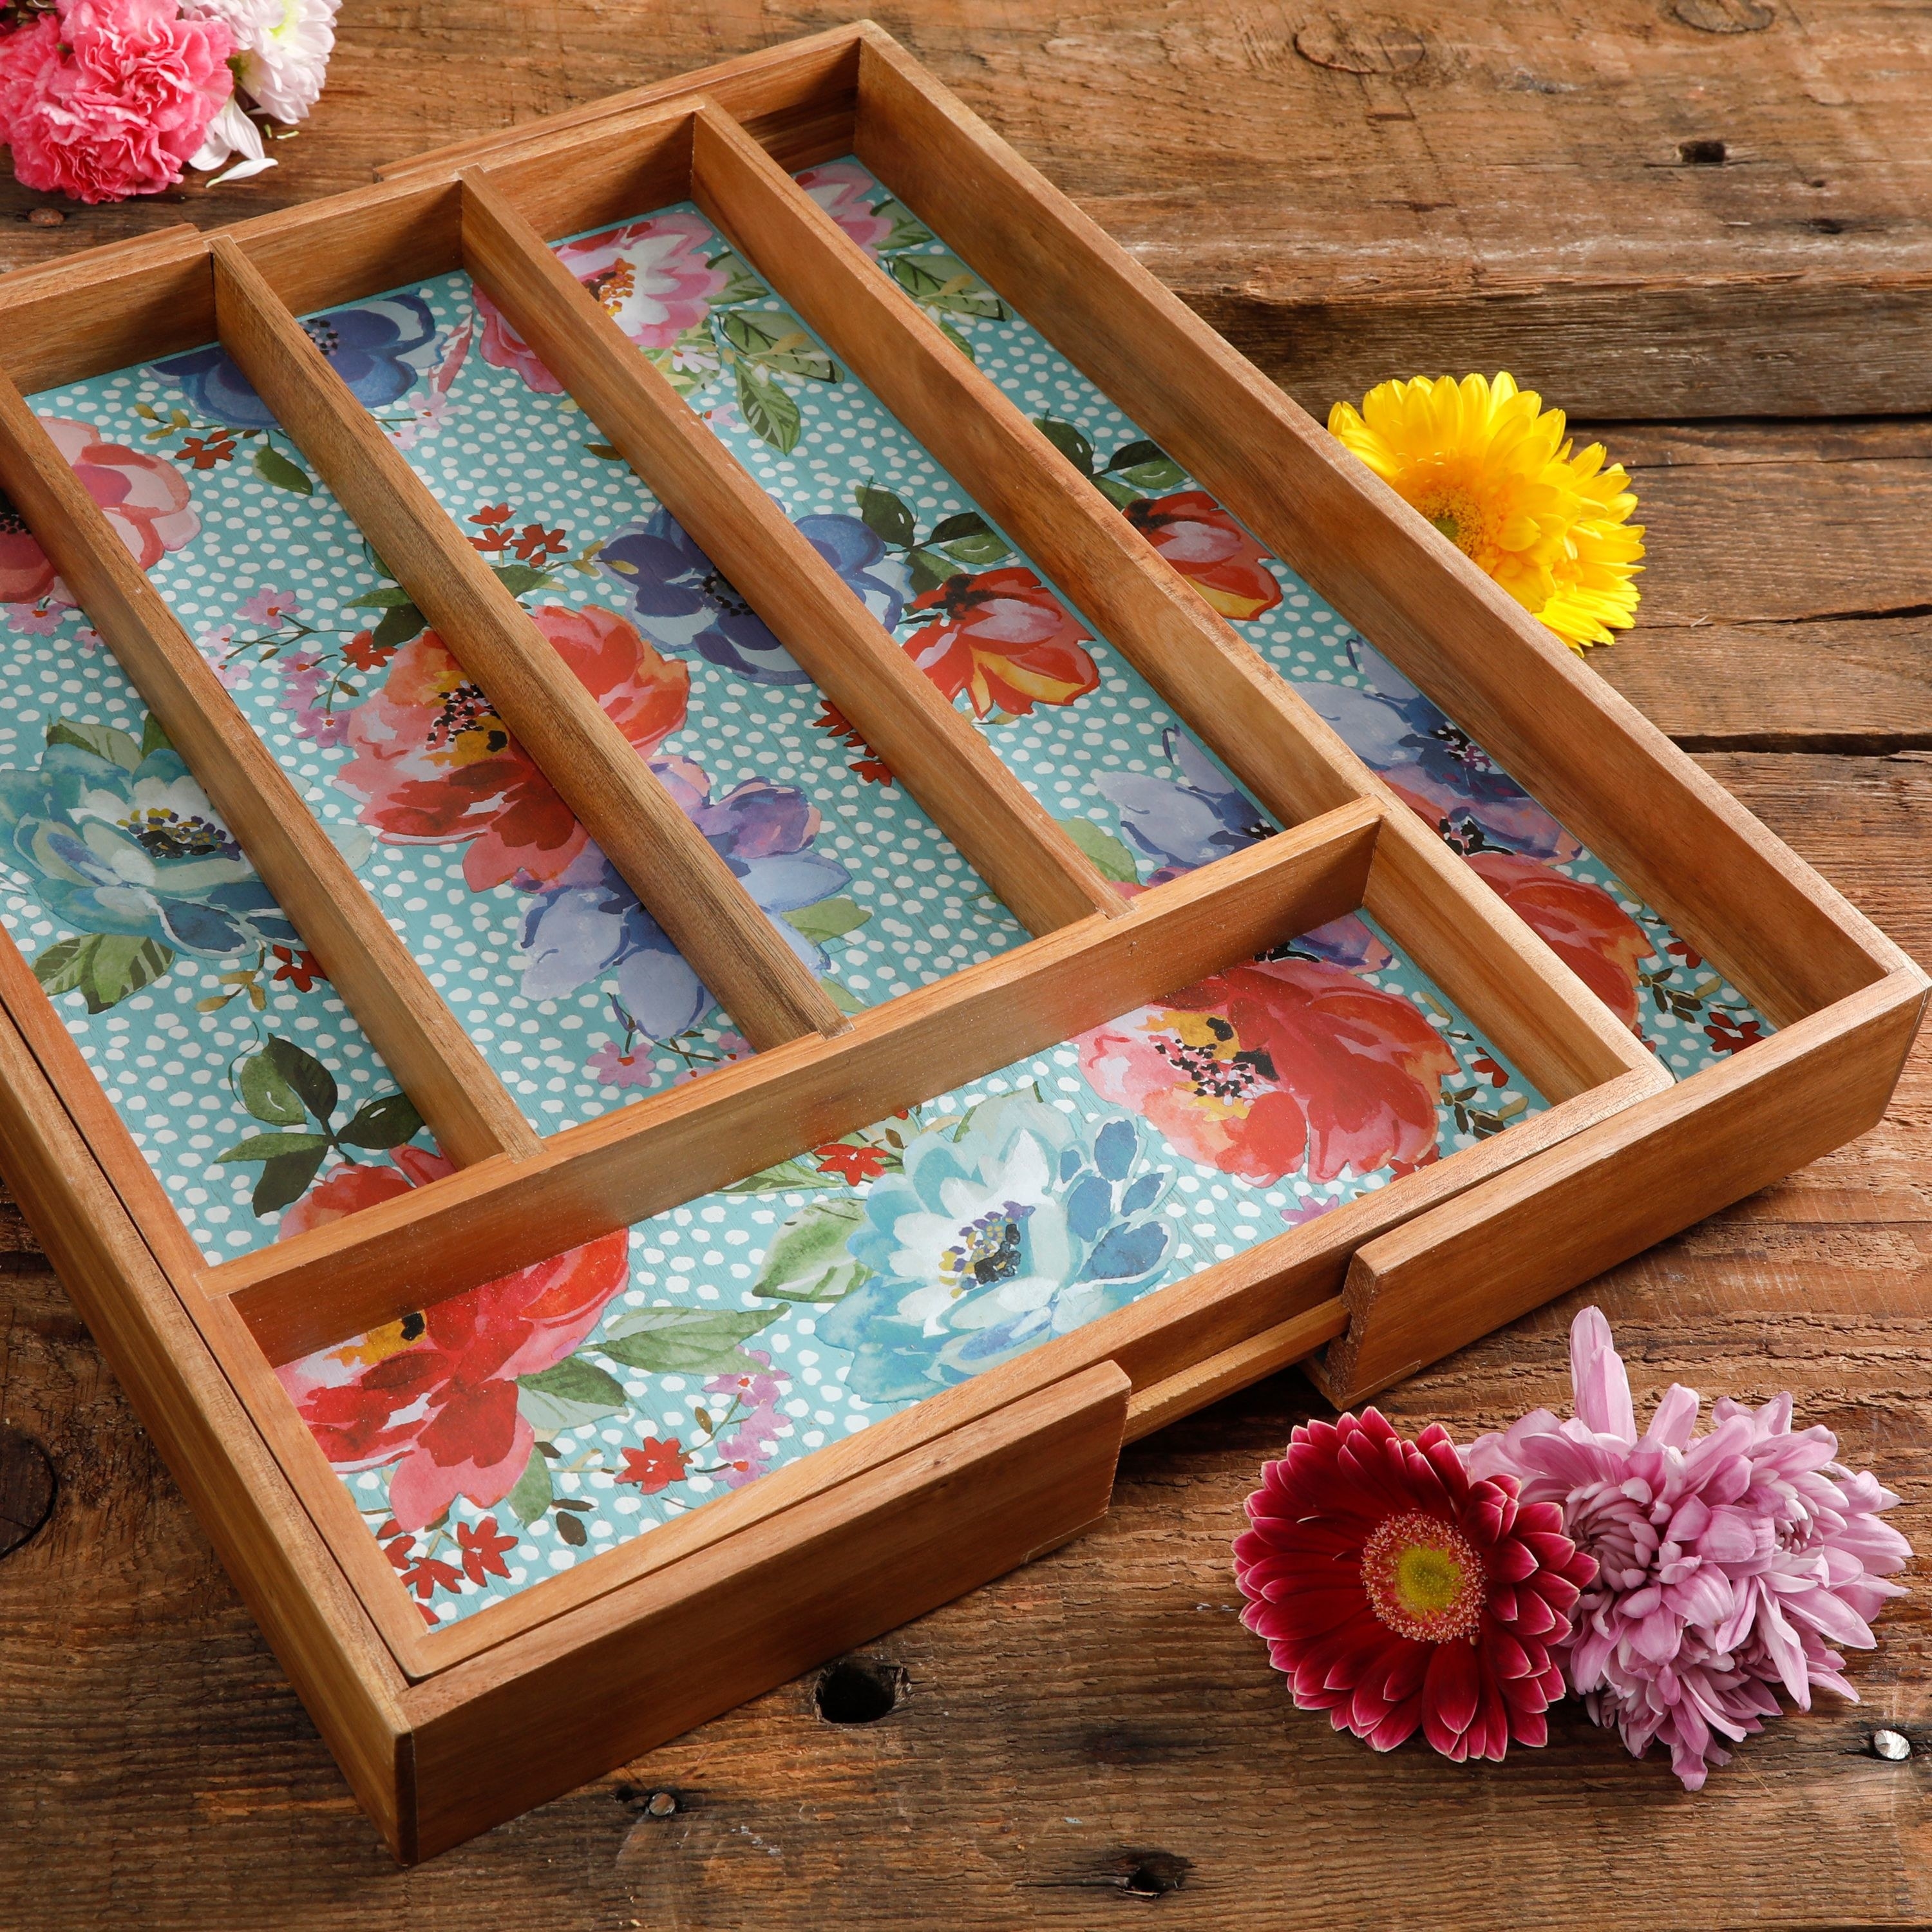 The wooden utensil holder with a floral design